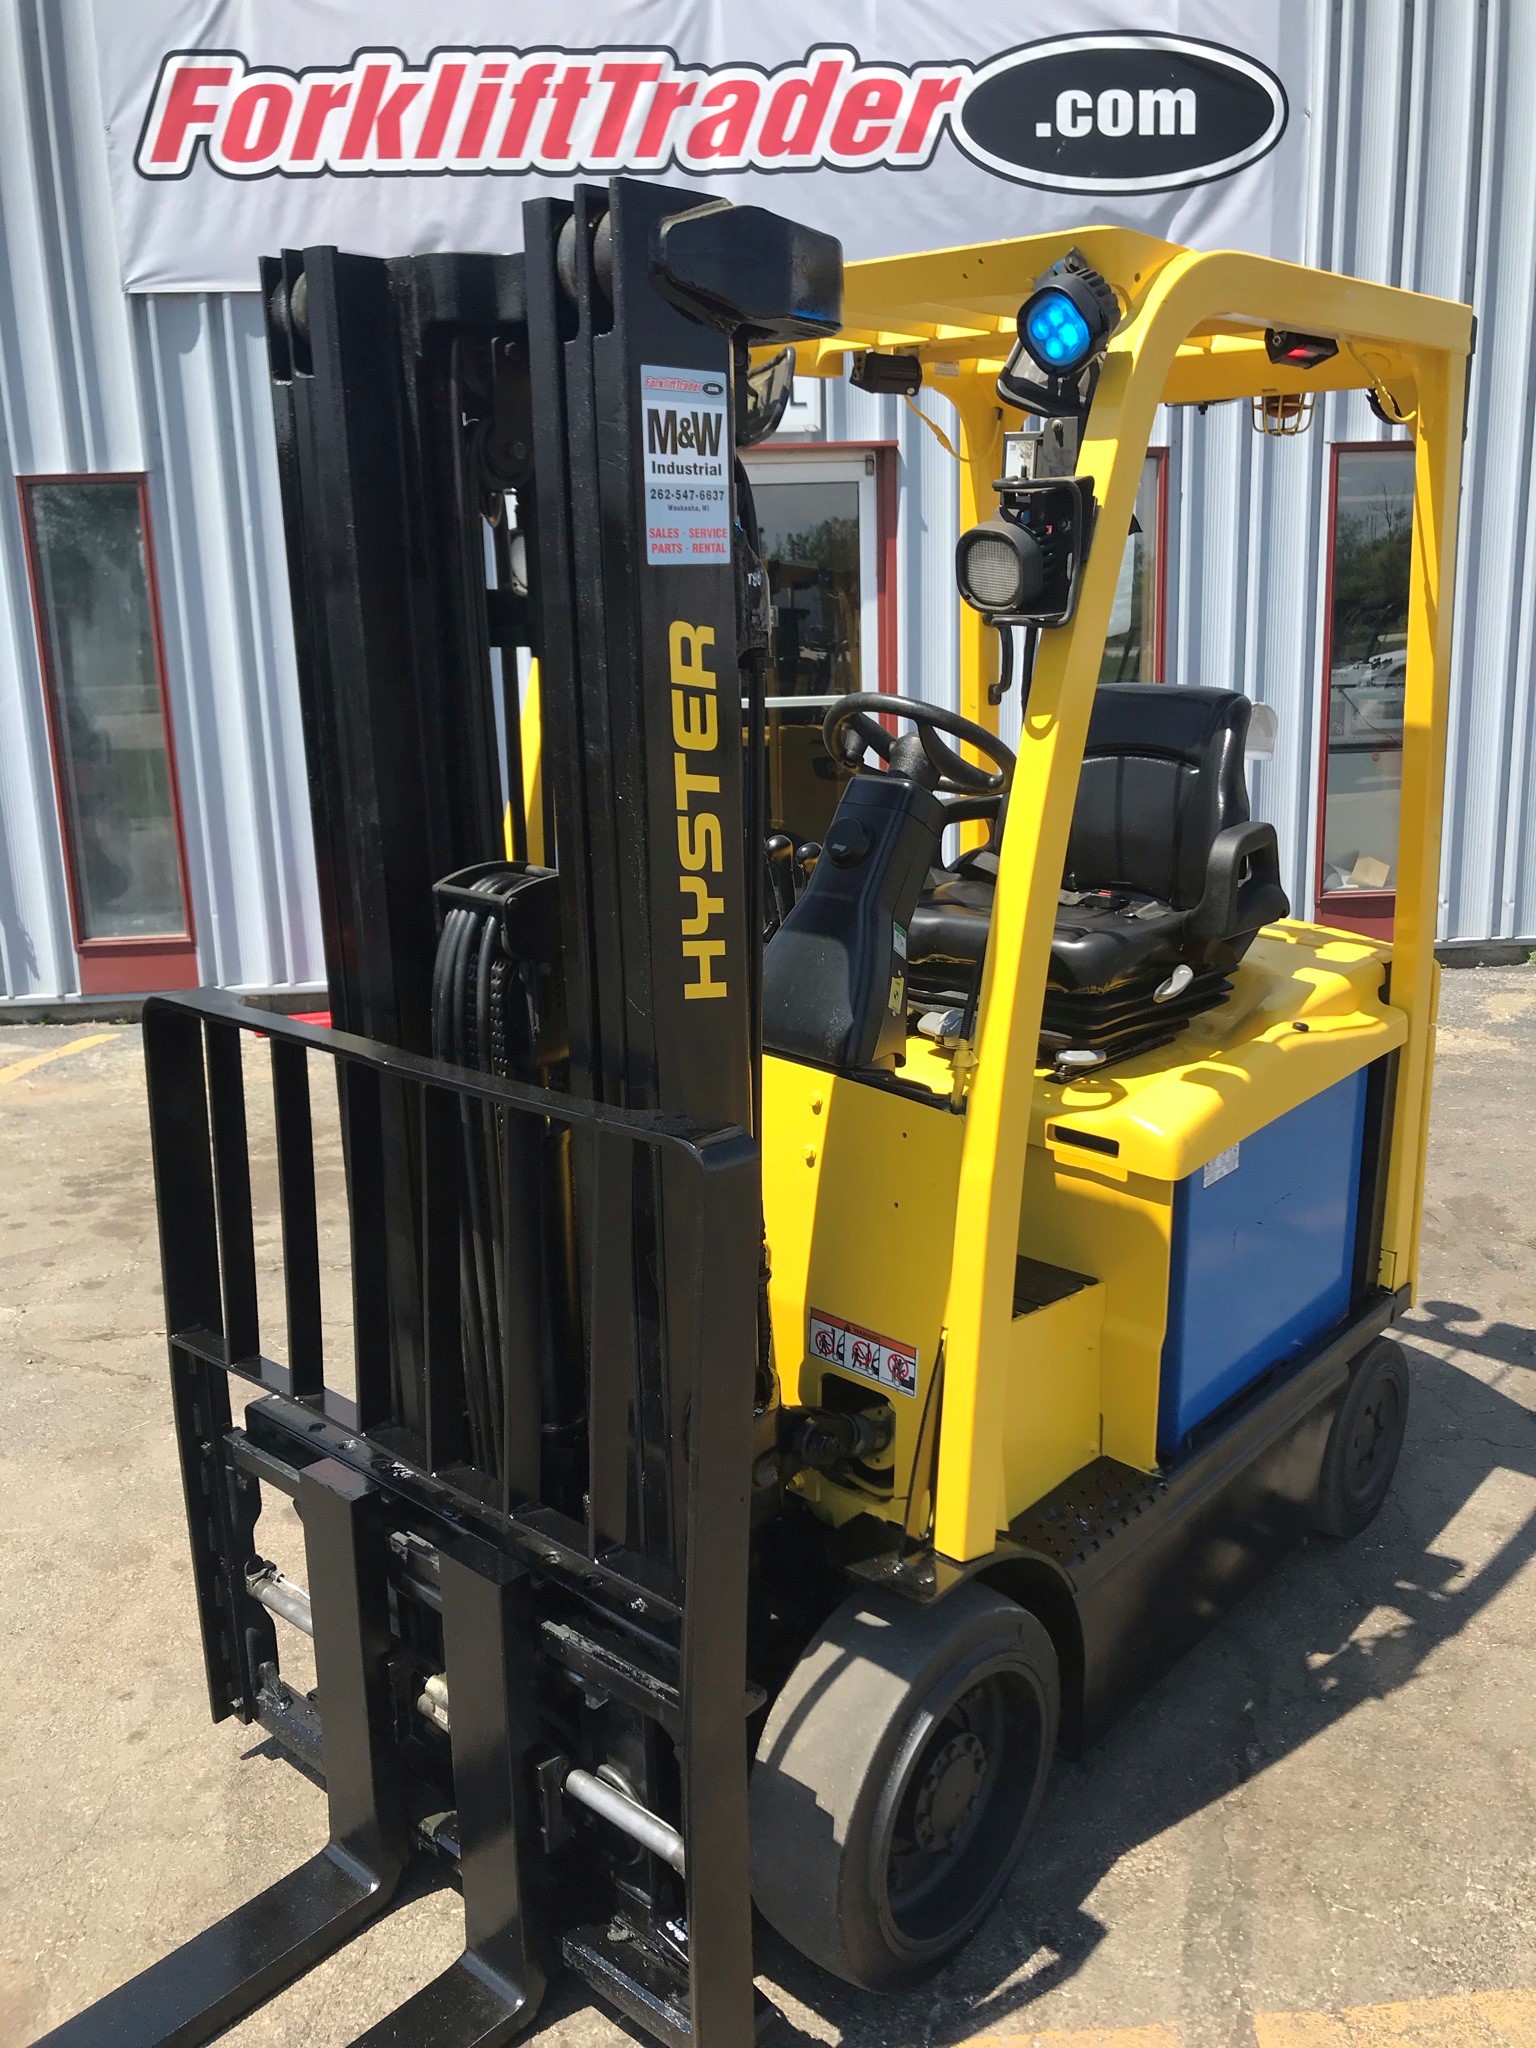 42" forks yellow hyster forklift for sale